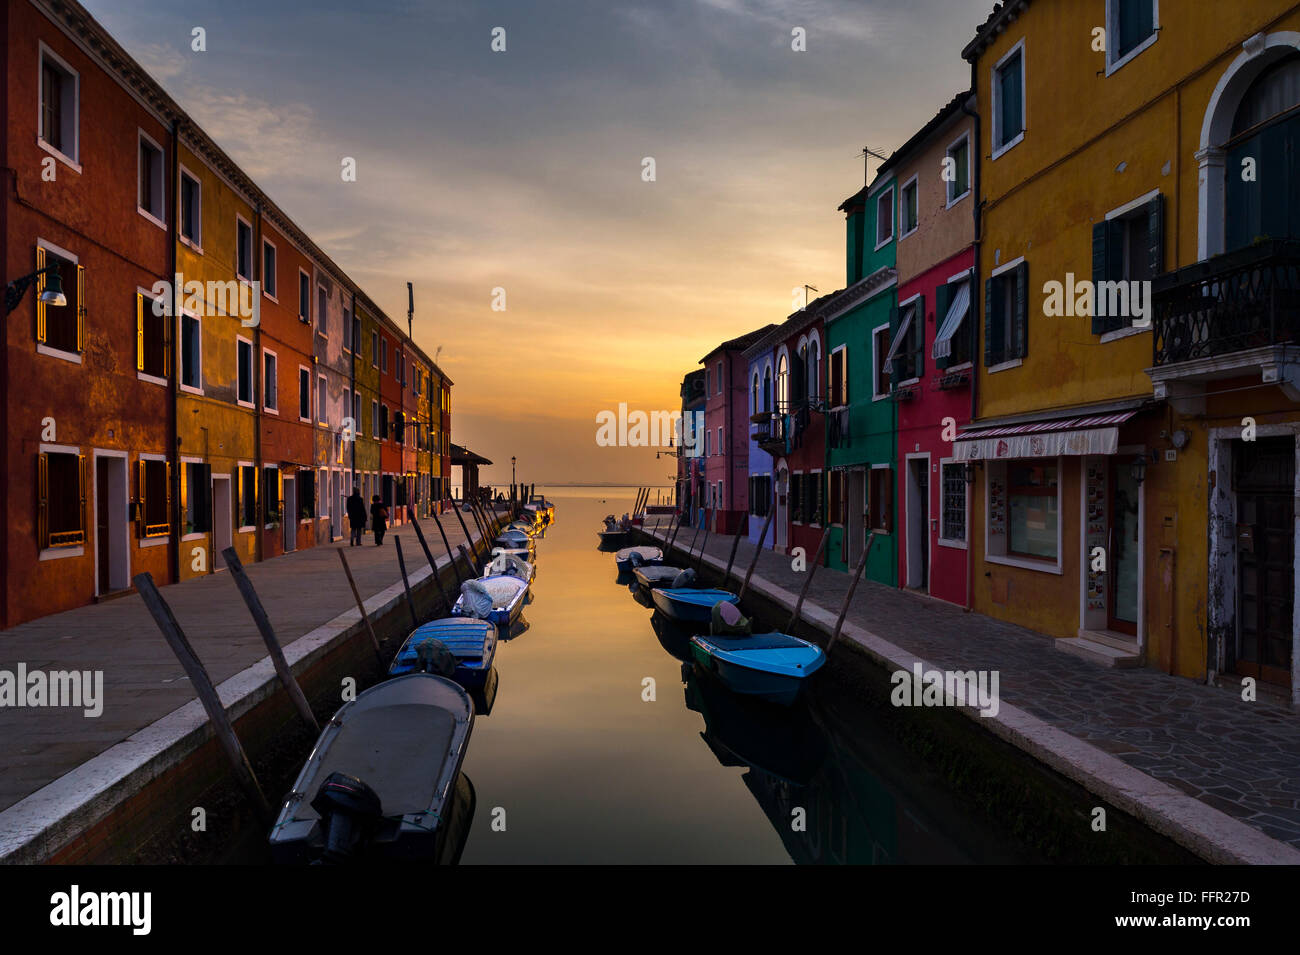 Colorful houses on canal at sunset, Burano, Venice, Veneto, Italy Stock Photo